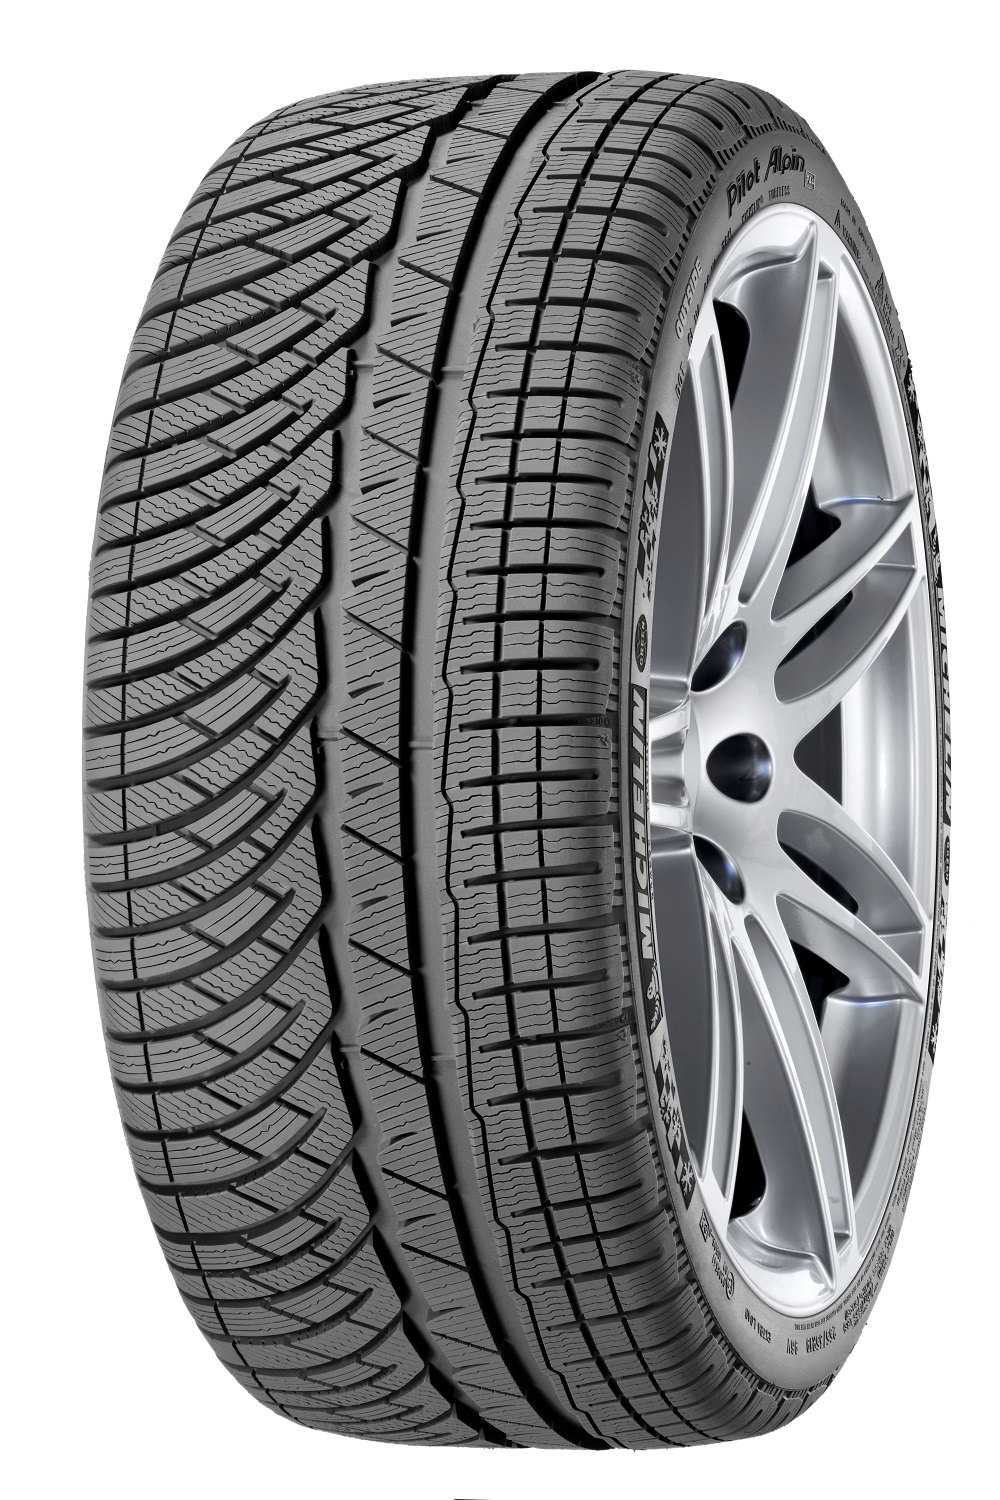 hair leisure You will get better Anvelope iarna MICHELIN PILOT ALPIN 4 245/40 R18 97V • cauciucuri ieftine  si oferte pret la anvelope iarna michelin pilot alpin 4 245/40 r18 97v